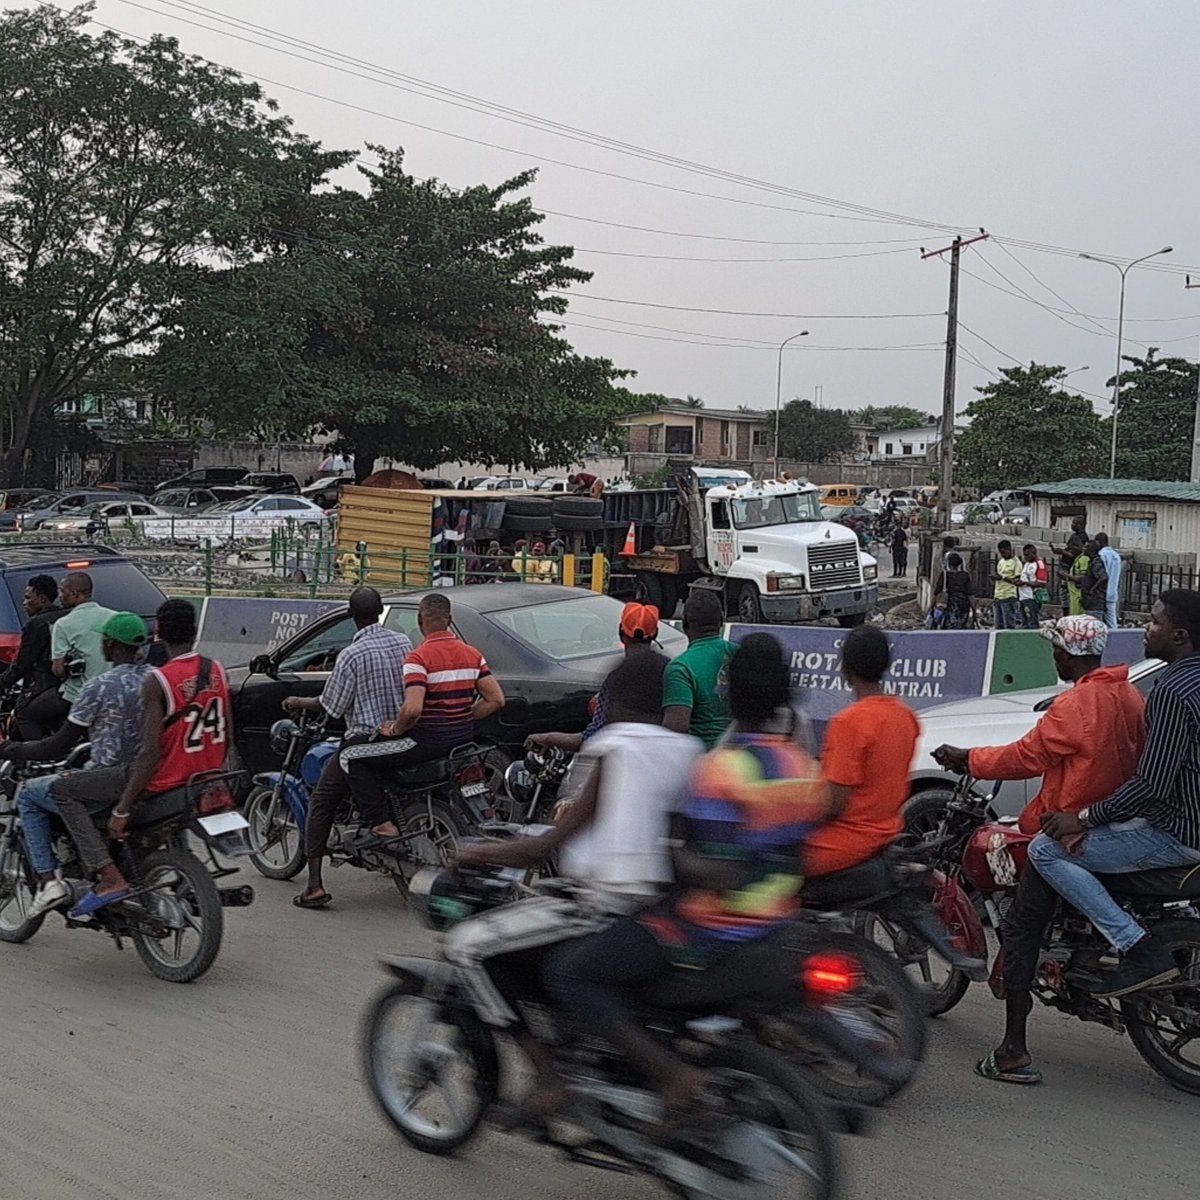 A truck carrying container has fallen on the Festac link bridge blocking access into Festac Town. This has caused serious gridlock but being controlled as @_lastma and other personnel are on ground. Plan ya movement well. Did you witness this #festaconline